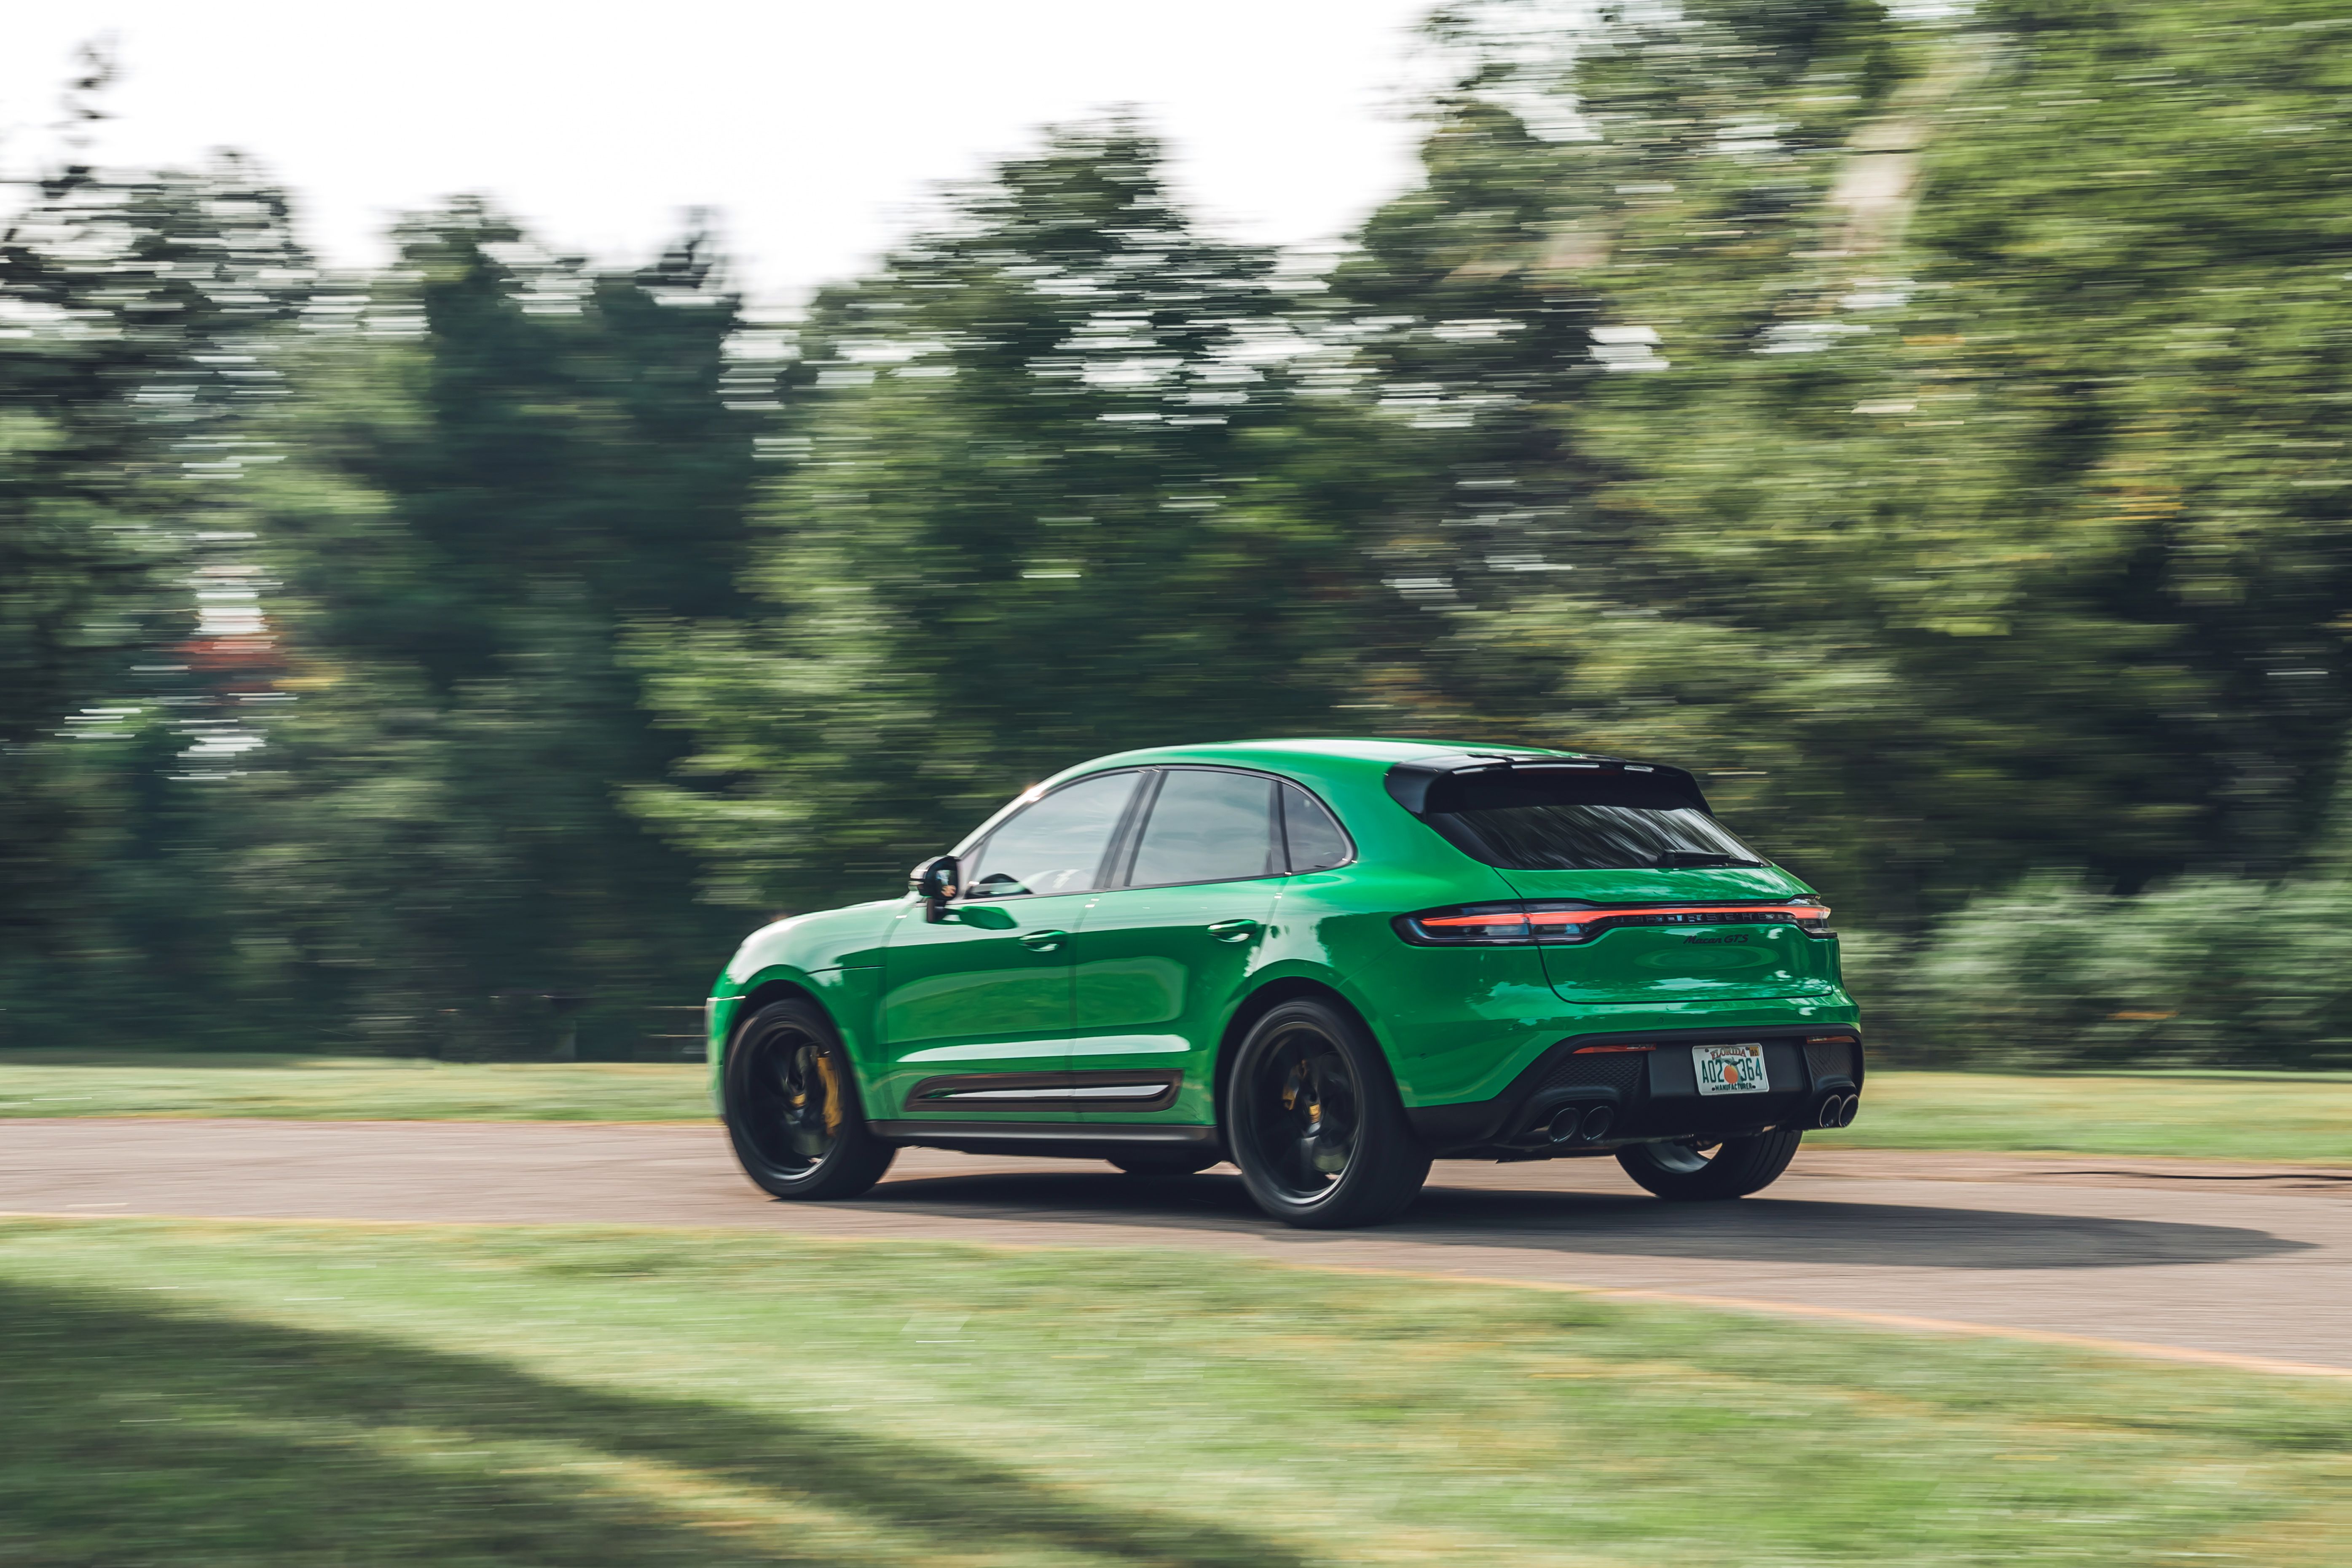 Tested: 2022 Porsche Macan GTS Is the One to Get